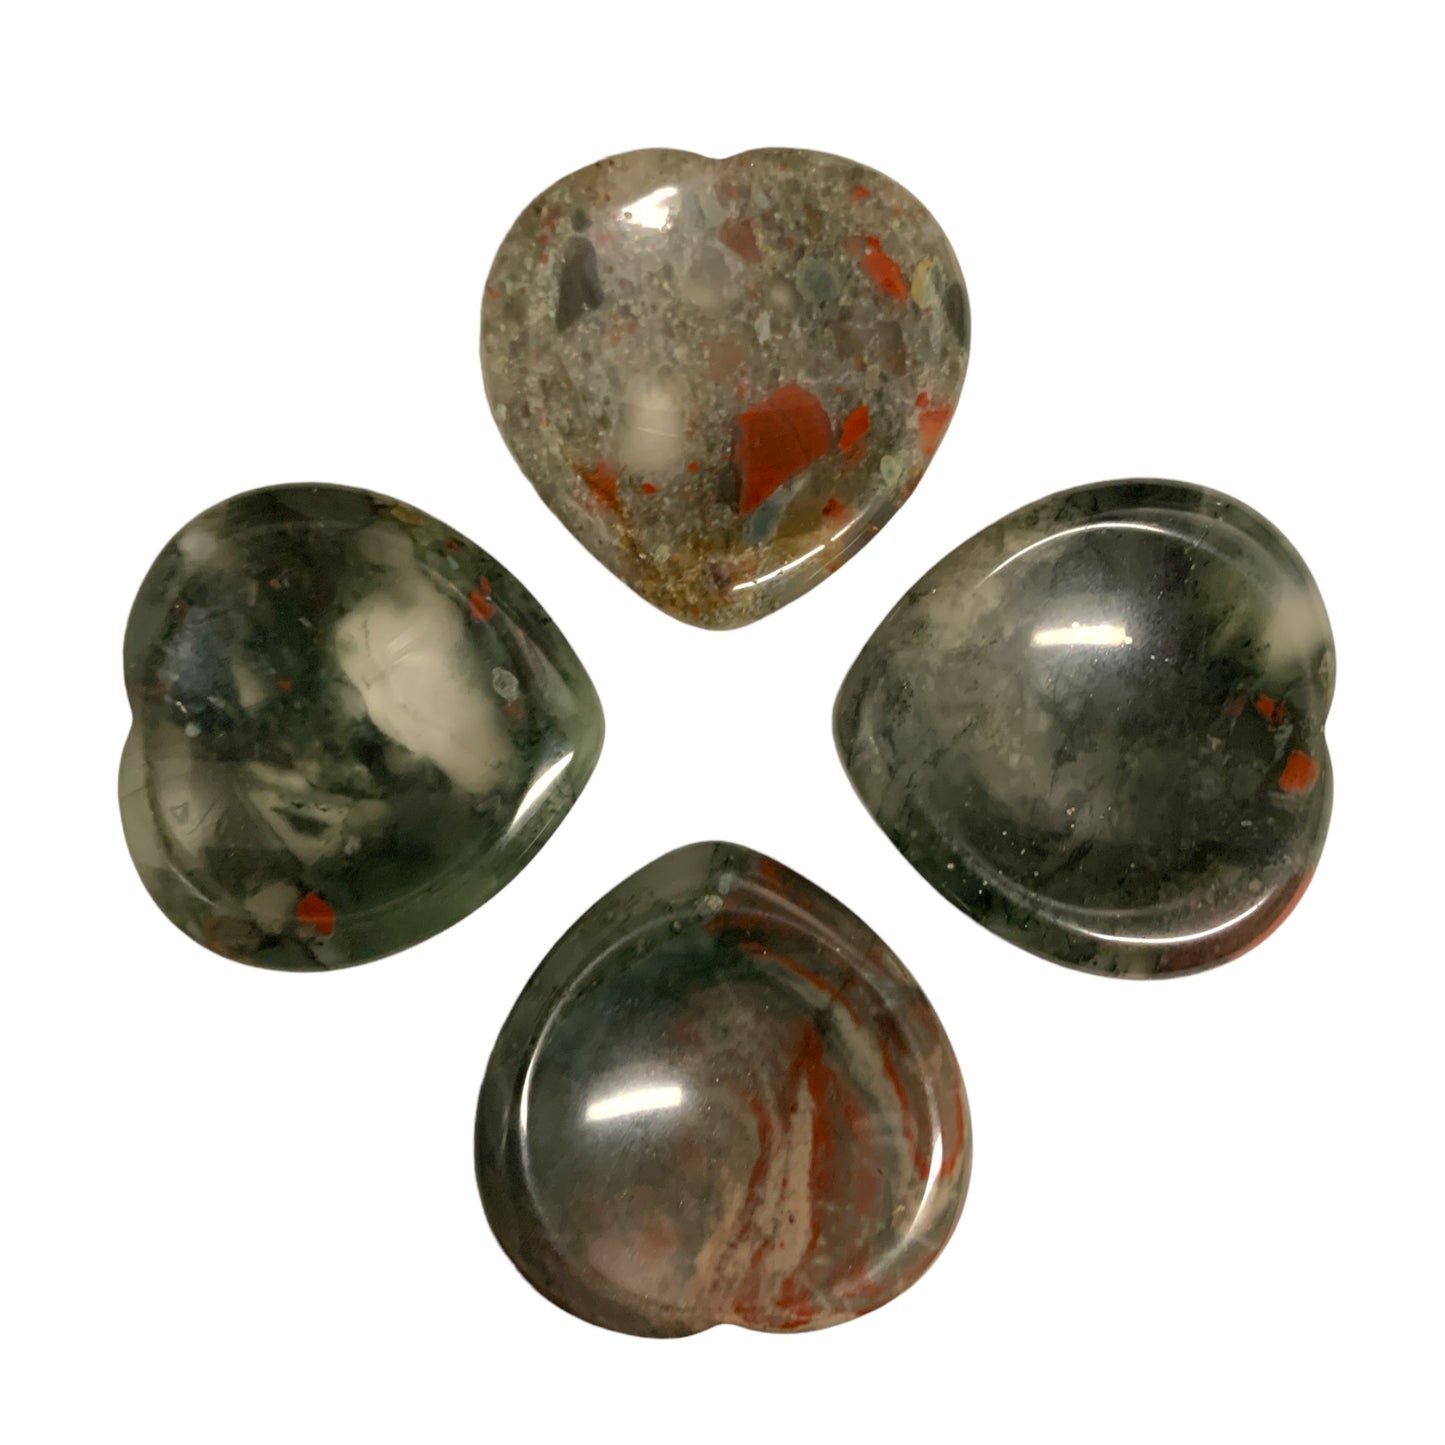 AFRICAN BLOOD STONE Heart Worry Stones - 40mm - China - NEW722